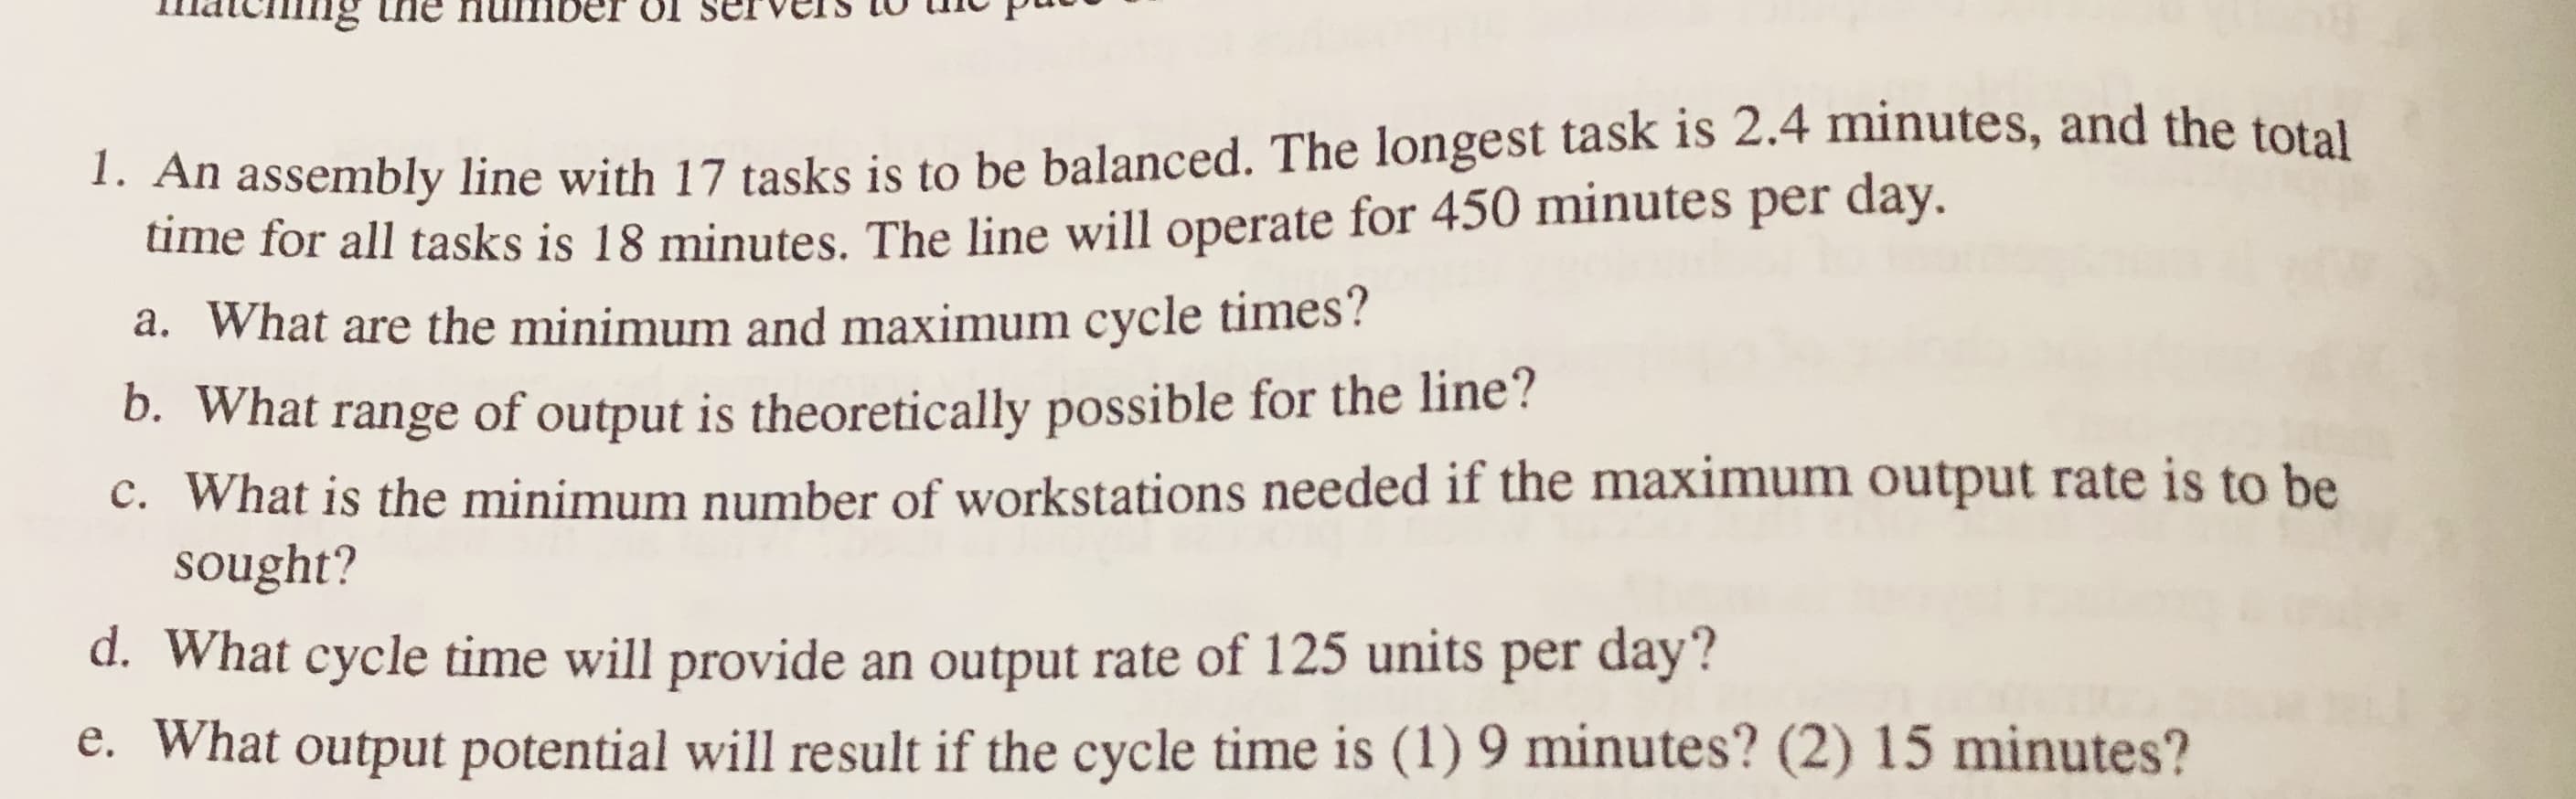 1. An assembly line with 17 tasks is to be balanced. The longest task is 2.4 minutes, and the total
ume for all tasks is 18 minutes. The line will operate for 450 minutes per day.
a. What are the minimum and maximum cycle times?
b. What range of output is theoretically possible for the line?
c. What is the minimum number of workstations needed if the maximum output rate is to be
sought?
